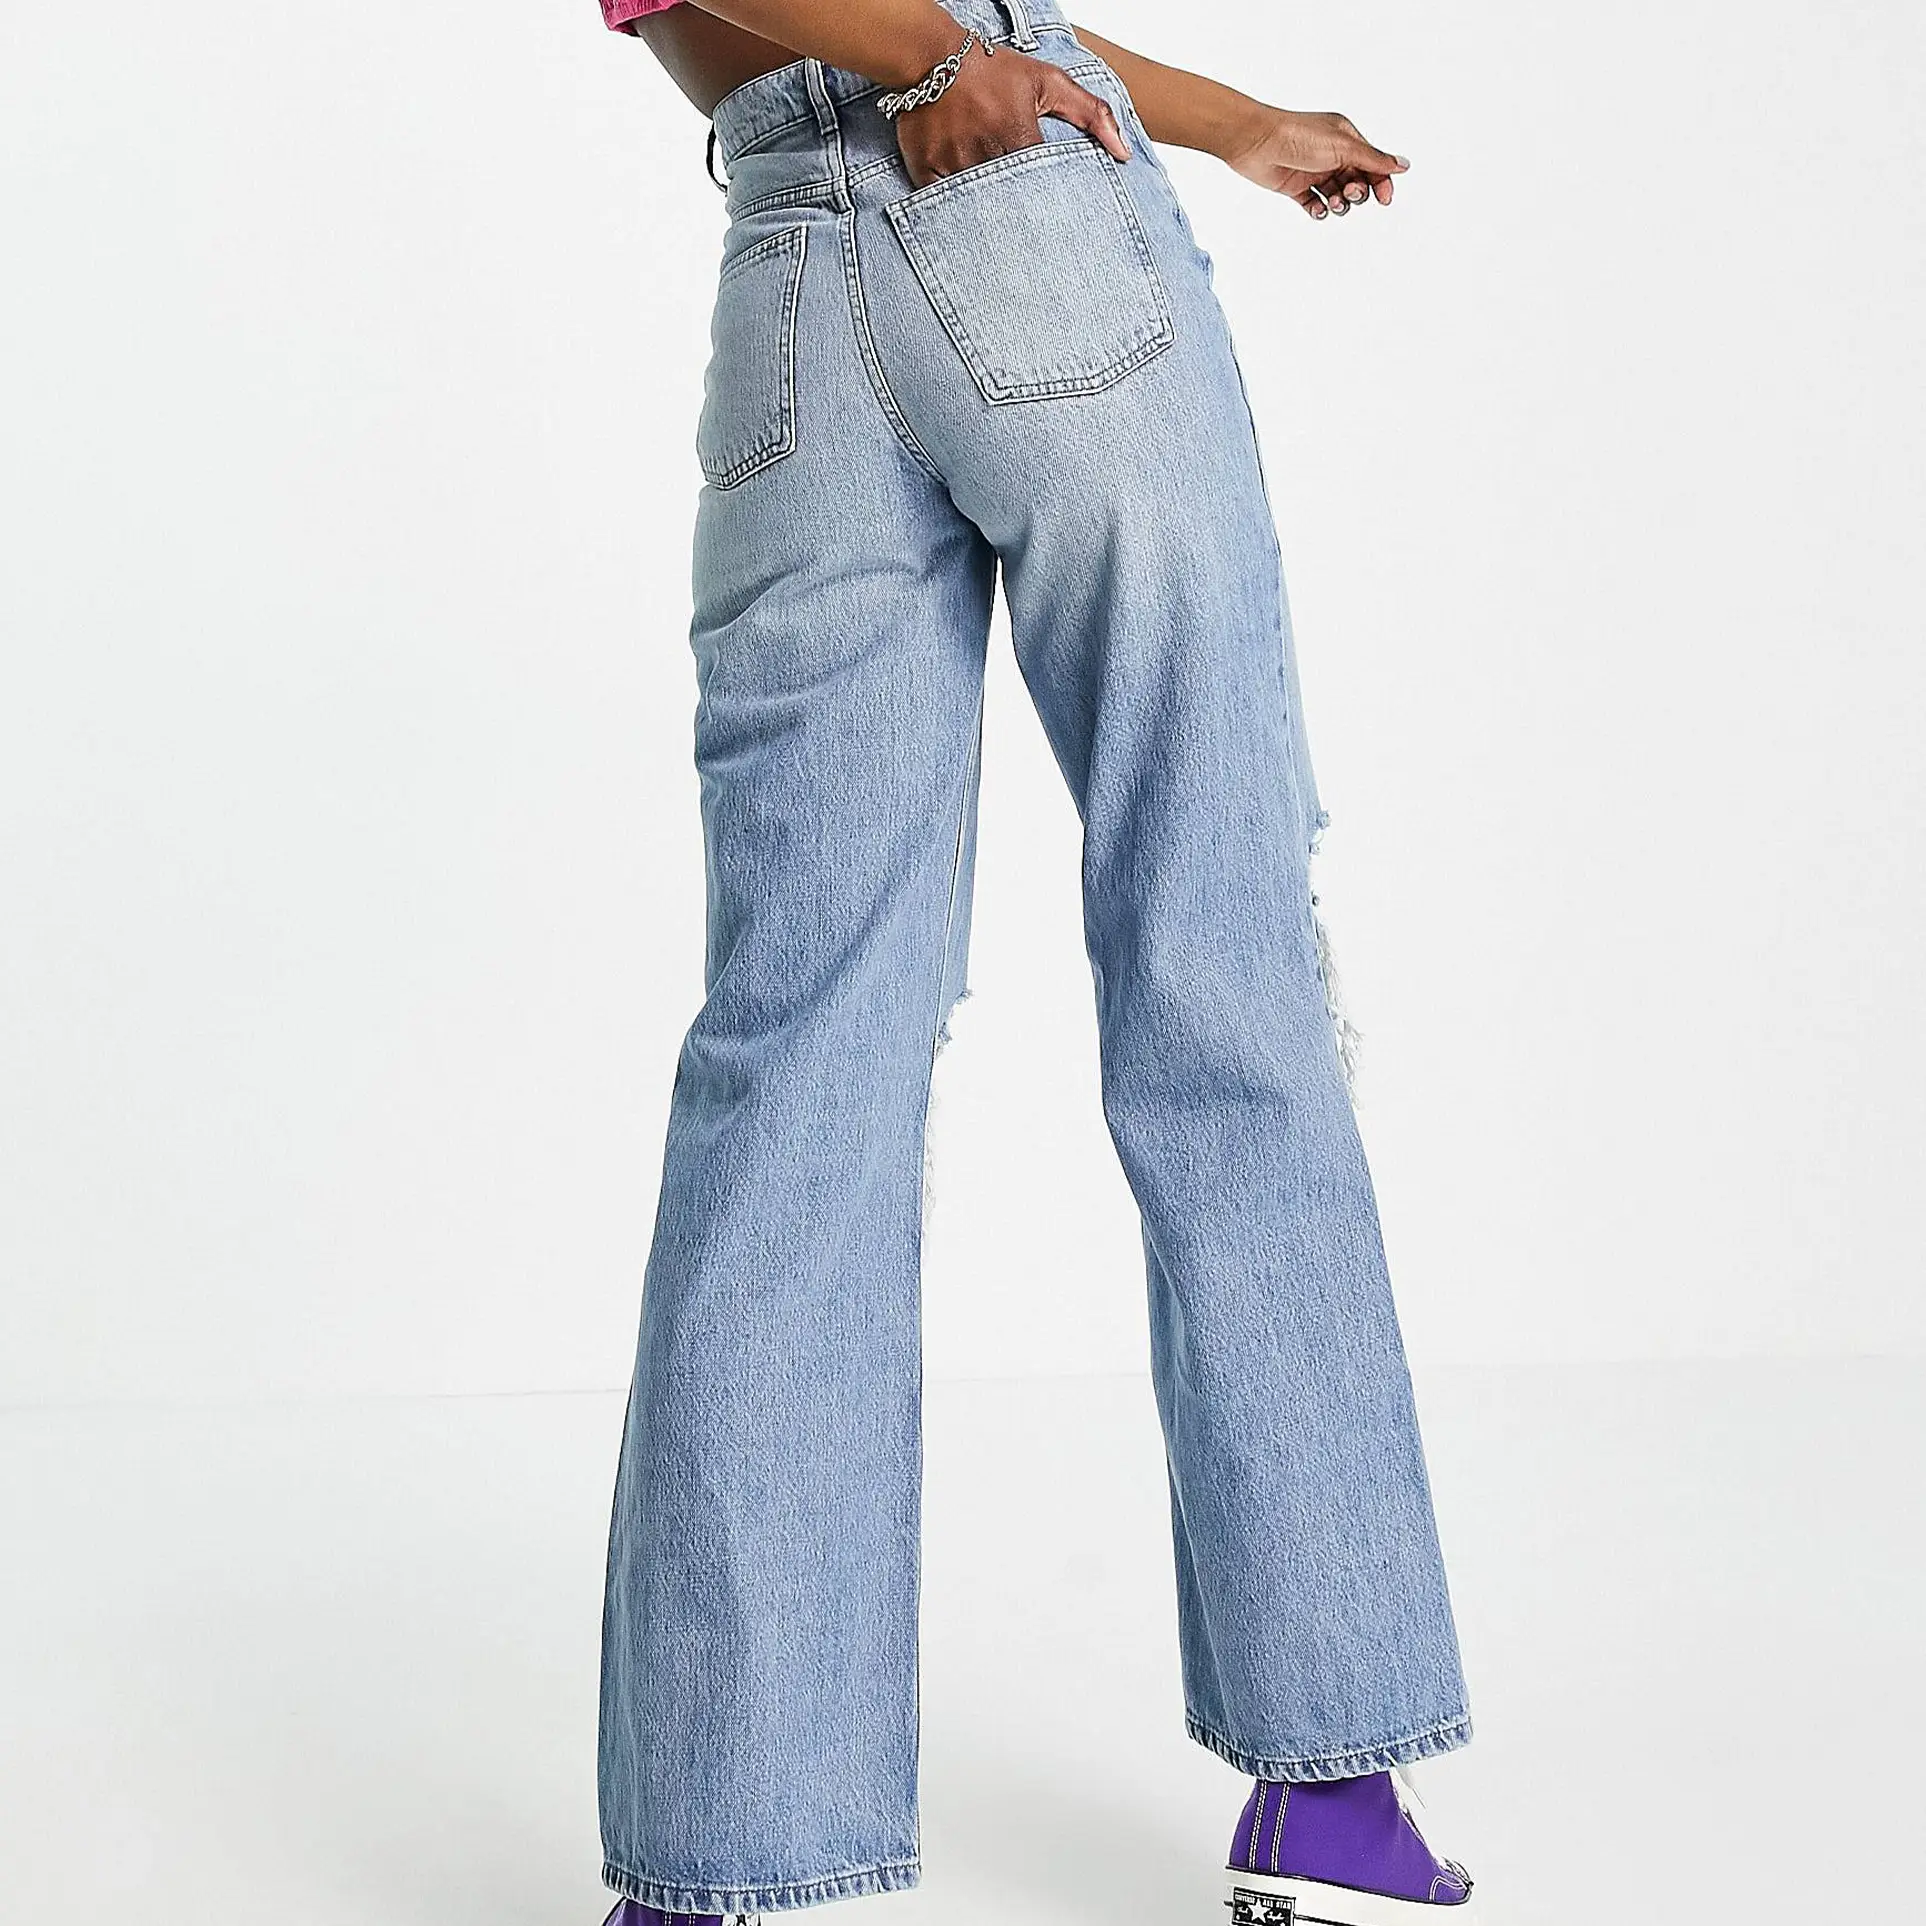 ASOS DESIGN Tall High Rise Relaxed Dad Jeans Brightwash Rips